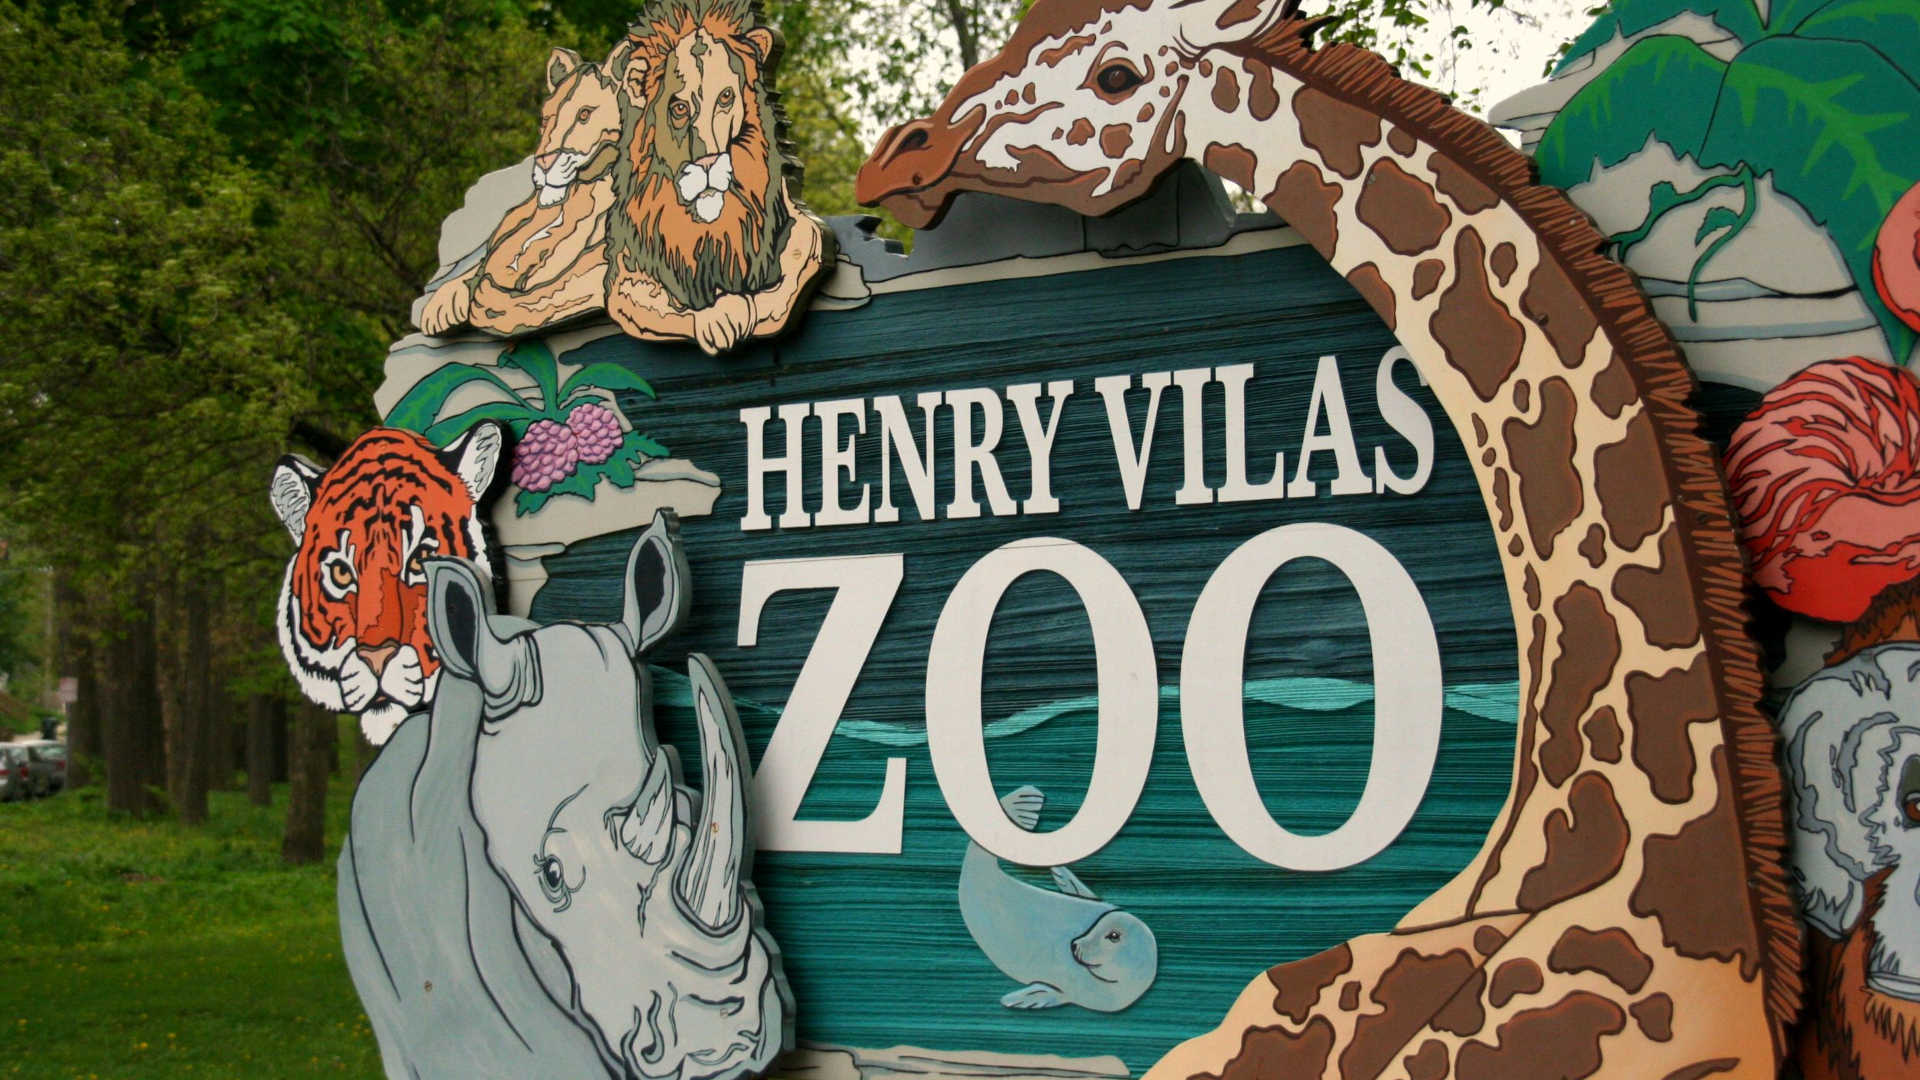 Zoo association officials admit that they mishandled an allegation of sexual harassment from a researcher at the Henry Vilas Zoo in Wisconsin.